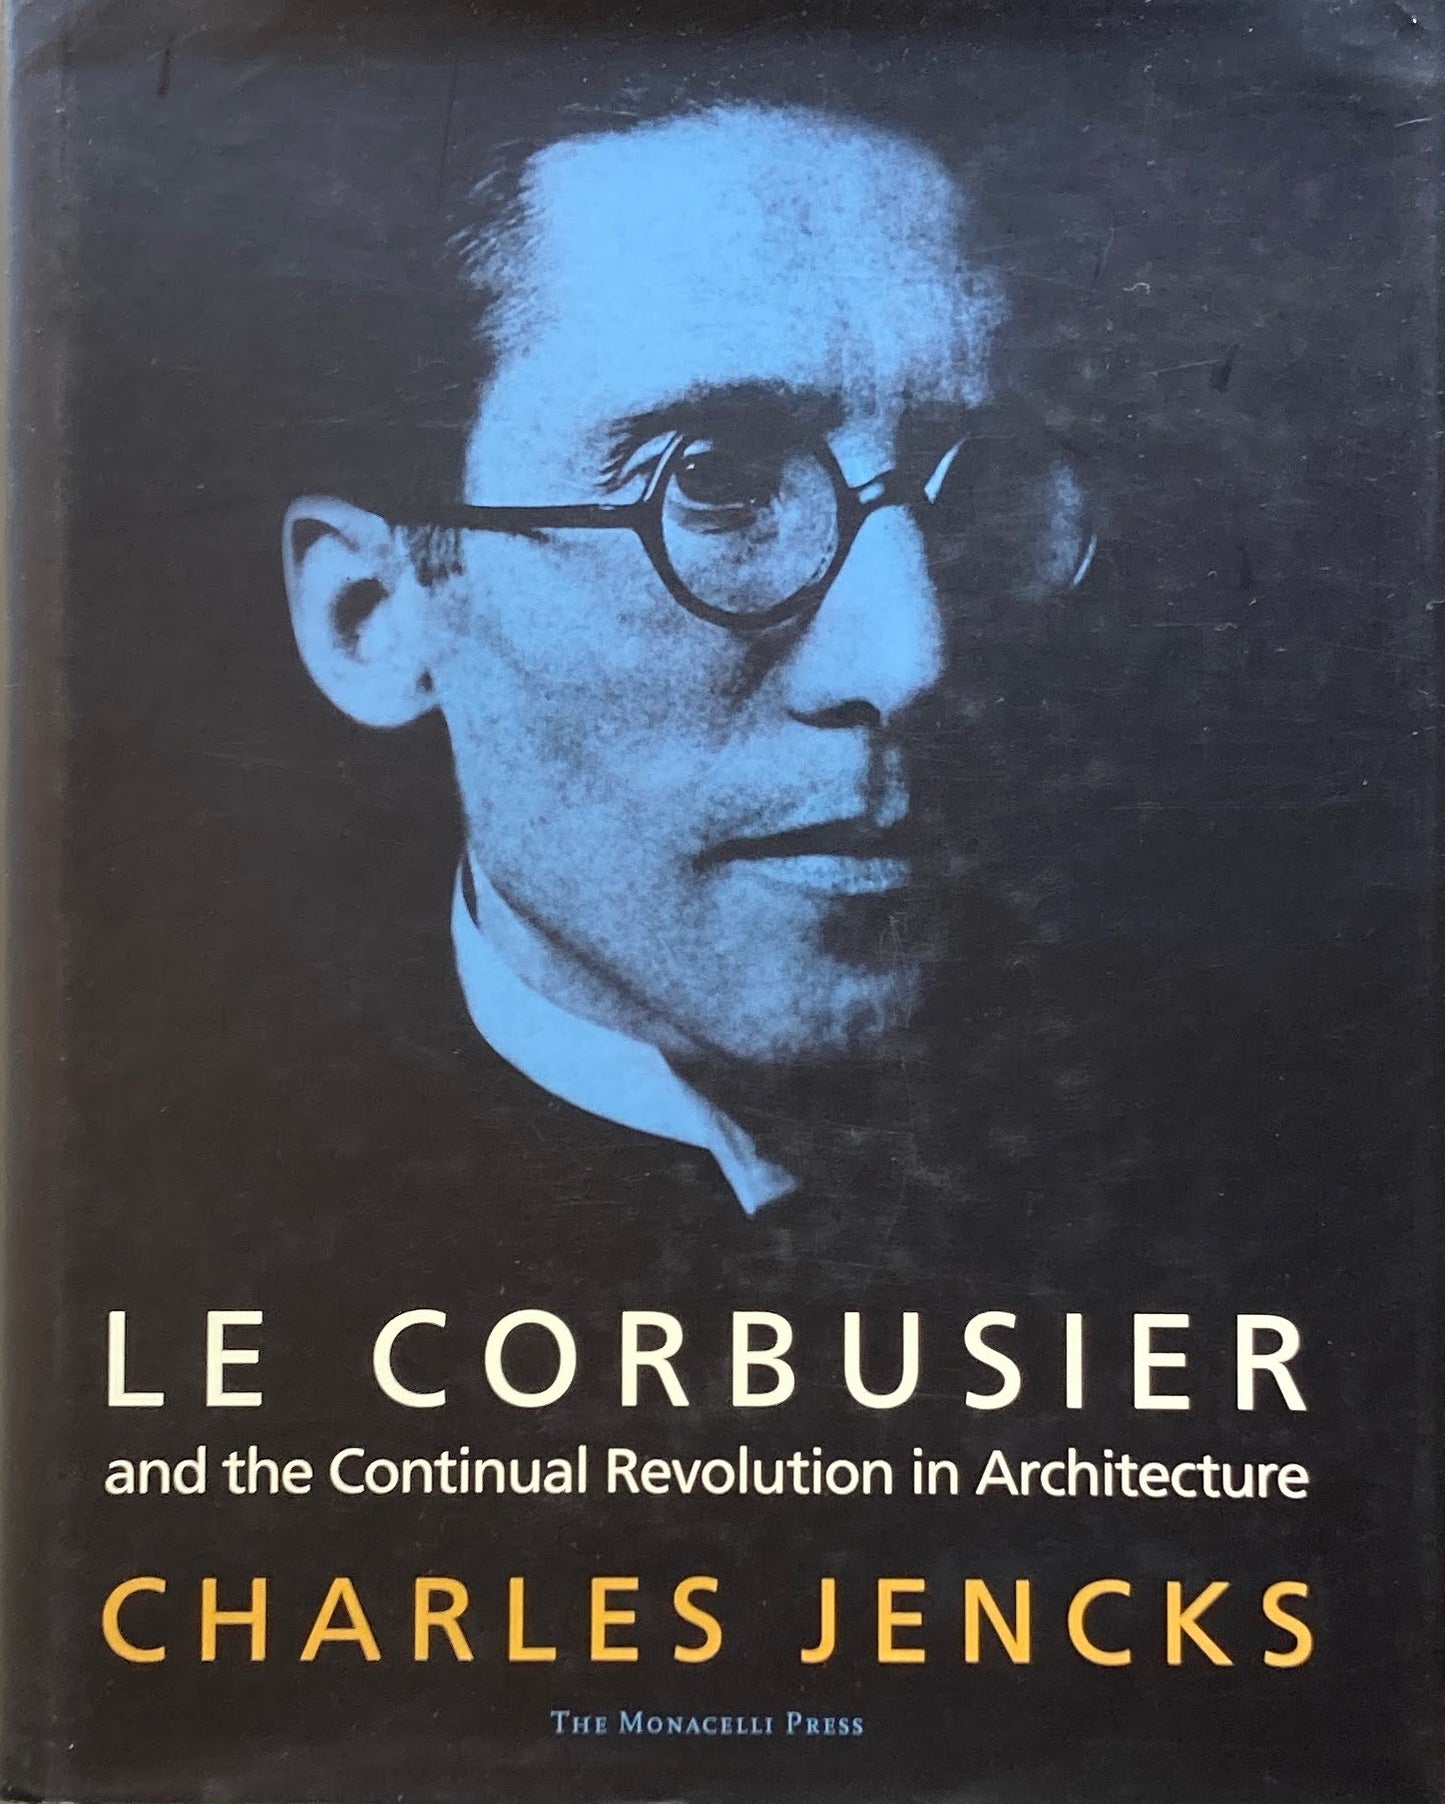 Le Corbusier　and the Continual Revolution in Architecture　Charles Jencks　ル・コルビュジエ